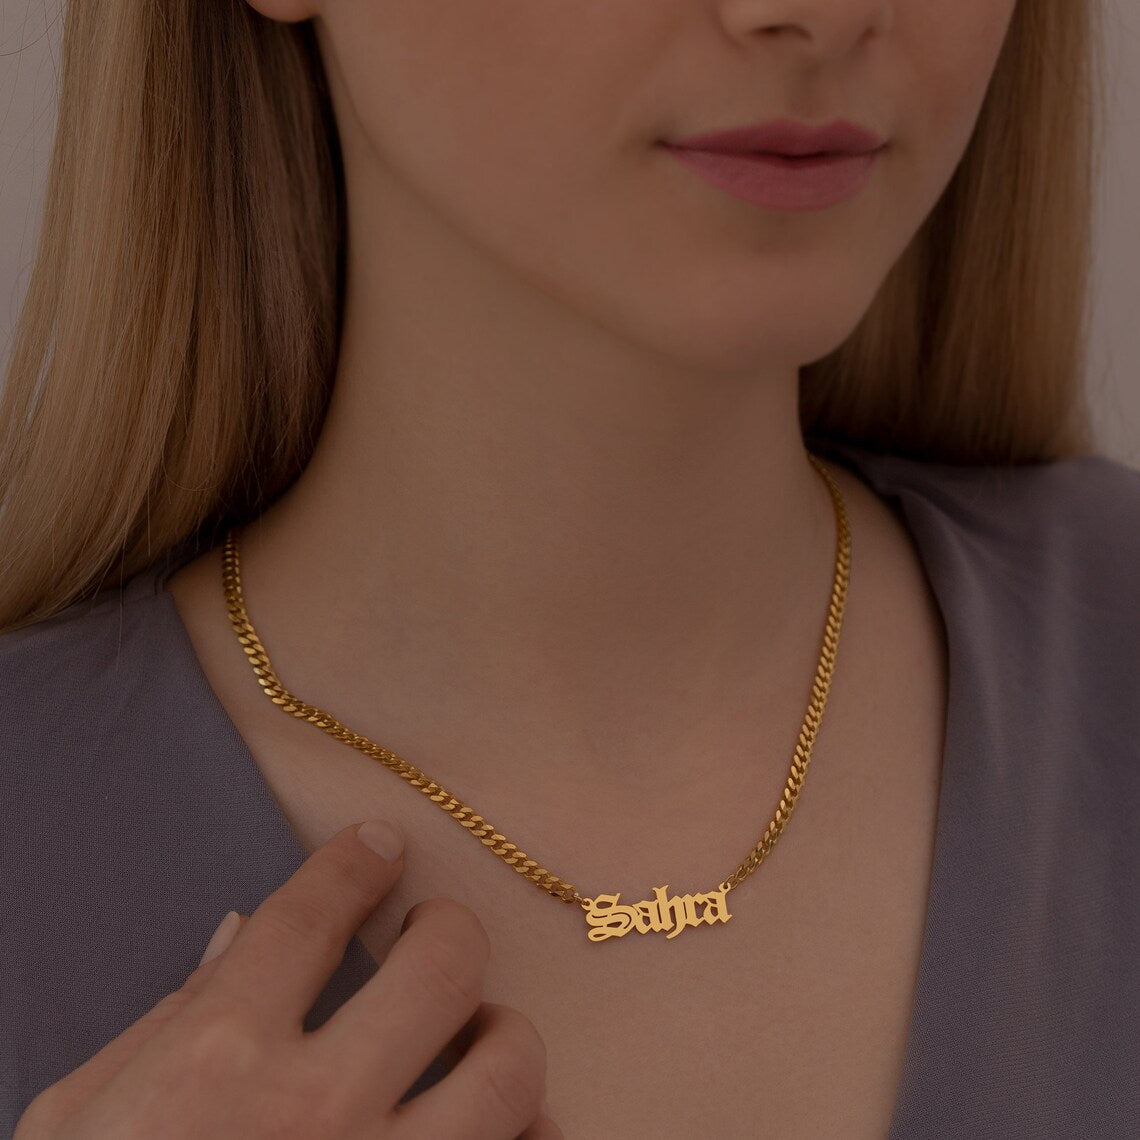 Gorgeous Personalised Old English Name Necklace